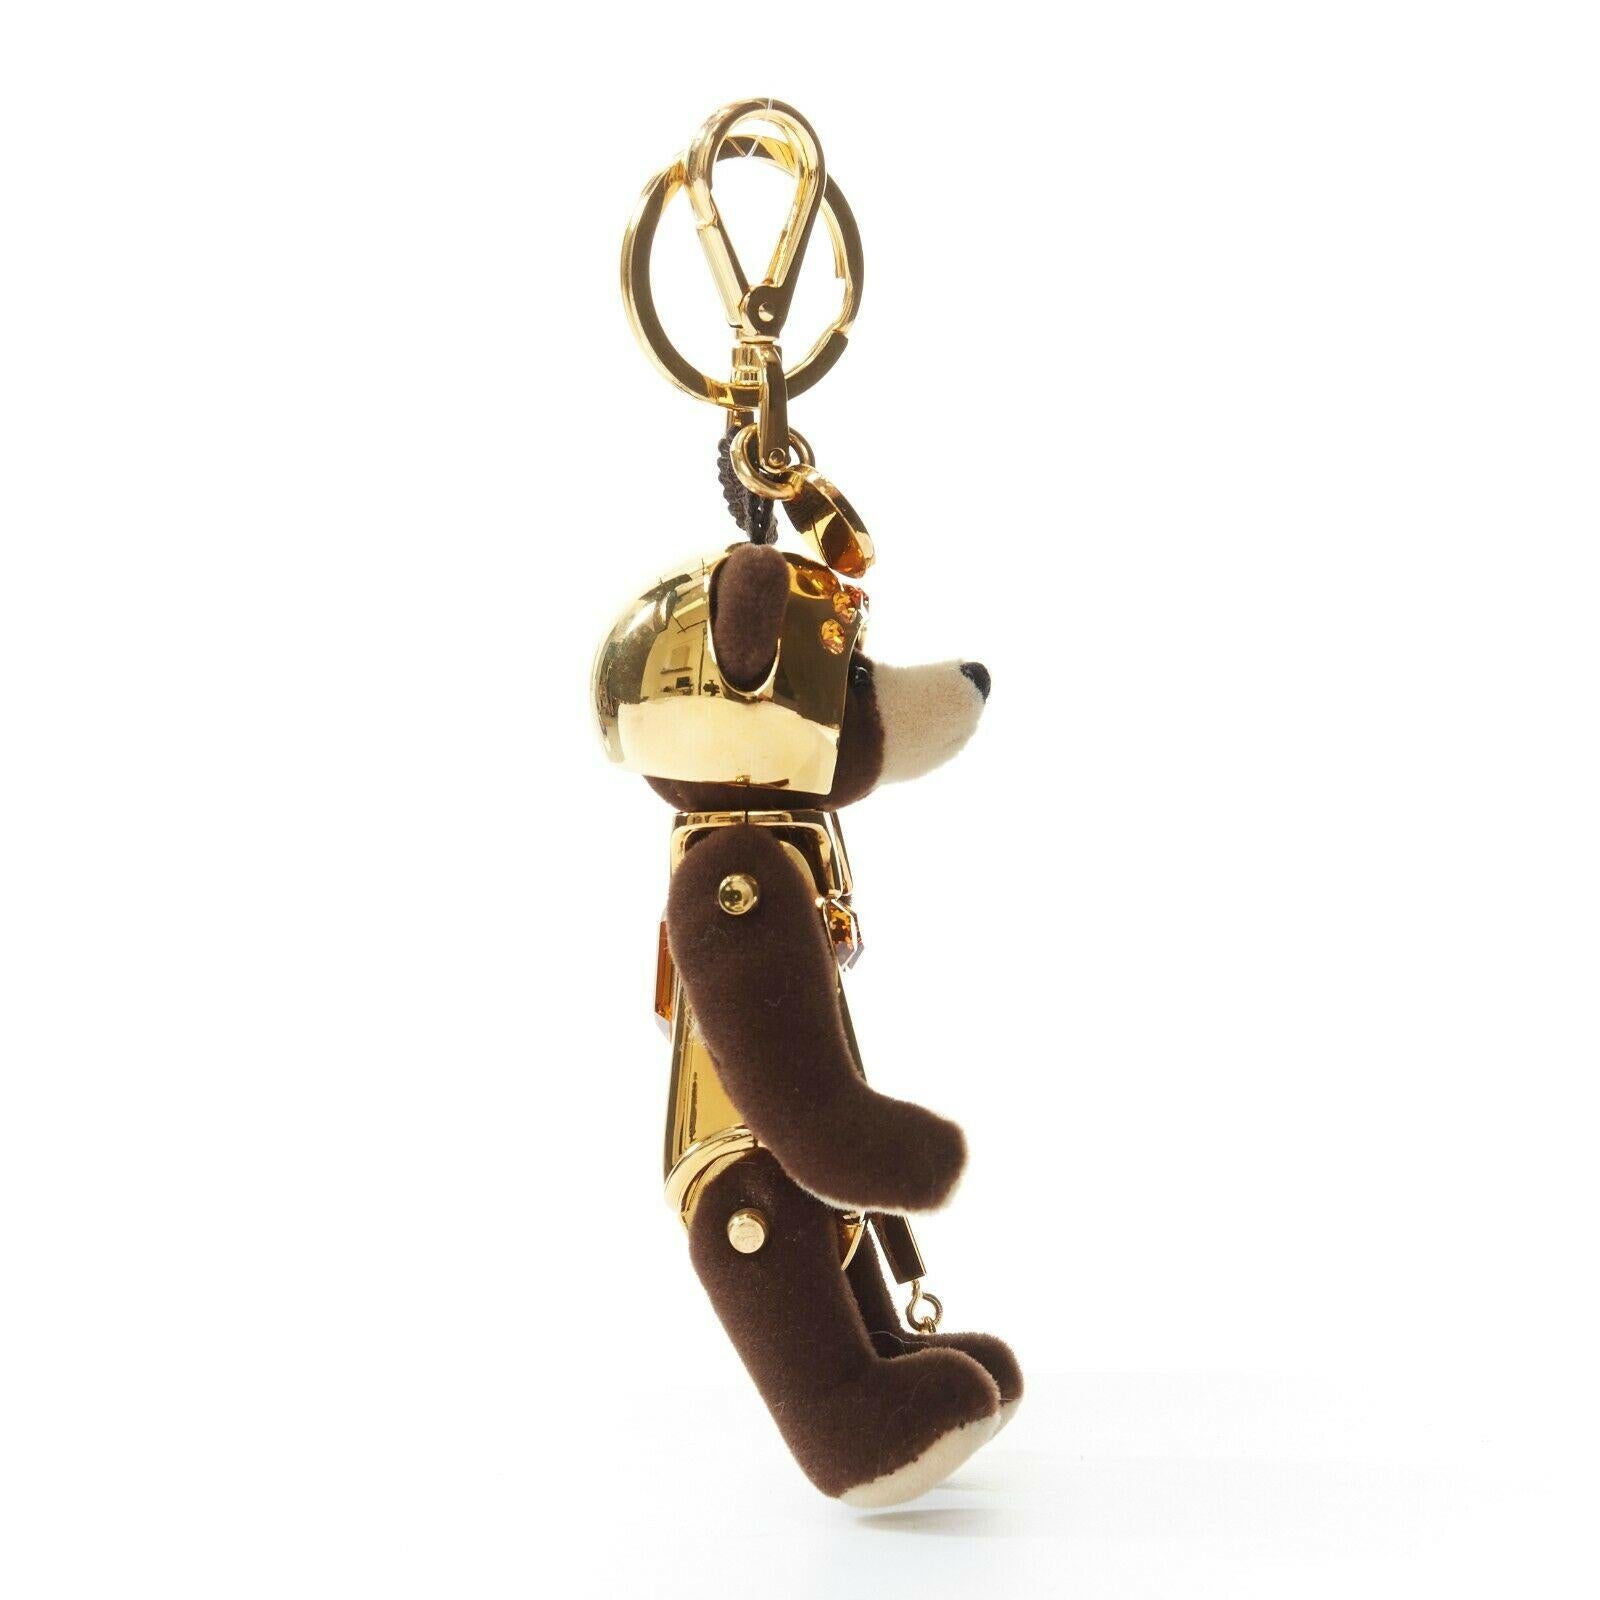 PRADA brown bear gold robot yellow crystal keyring keychain charm 
Reference: TGAS/A03378 
Brand: Prada 
Material: Metal 
Color: Gold 
Pattern: Solid 
Extra Detail: Brown bear wearing gold robot costume with yellow crystal embellishment. Keyring